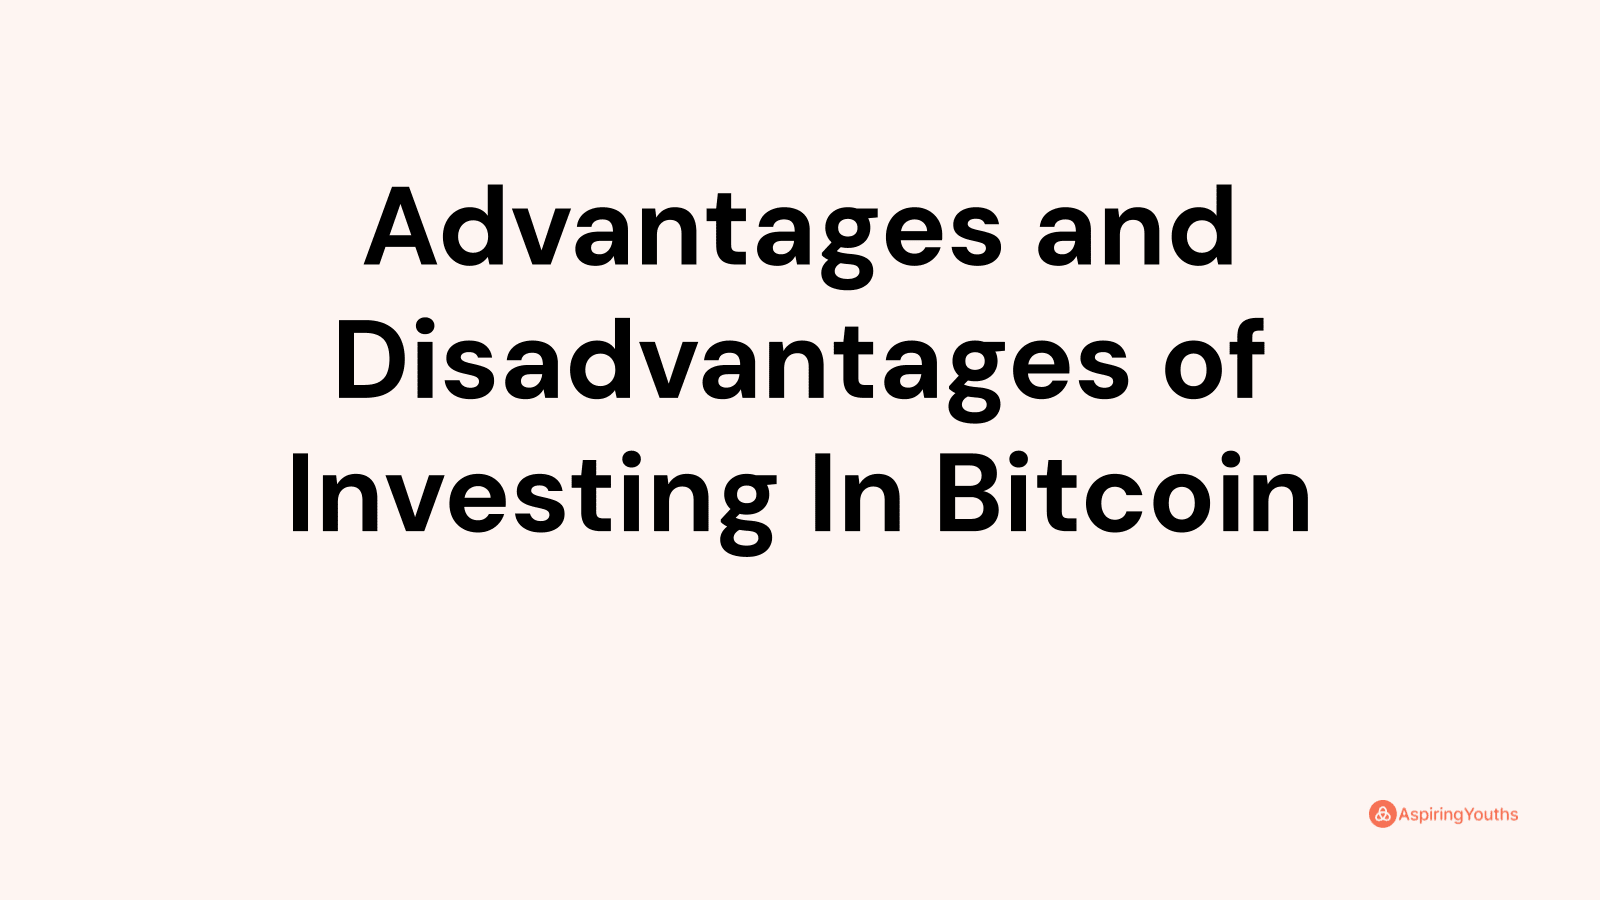 Advantages and disadvantages of Investing In Bitcoin